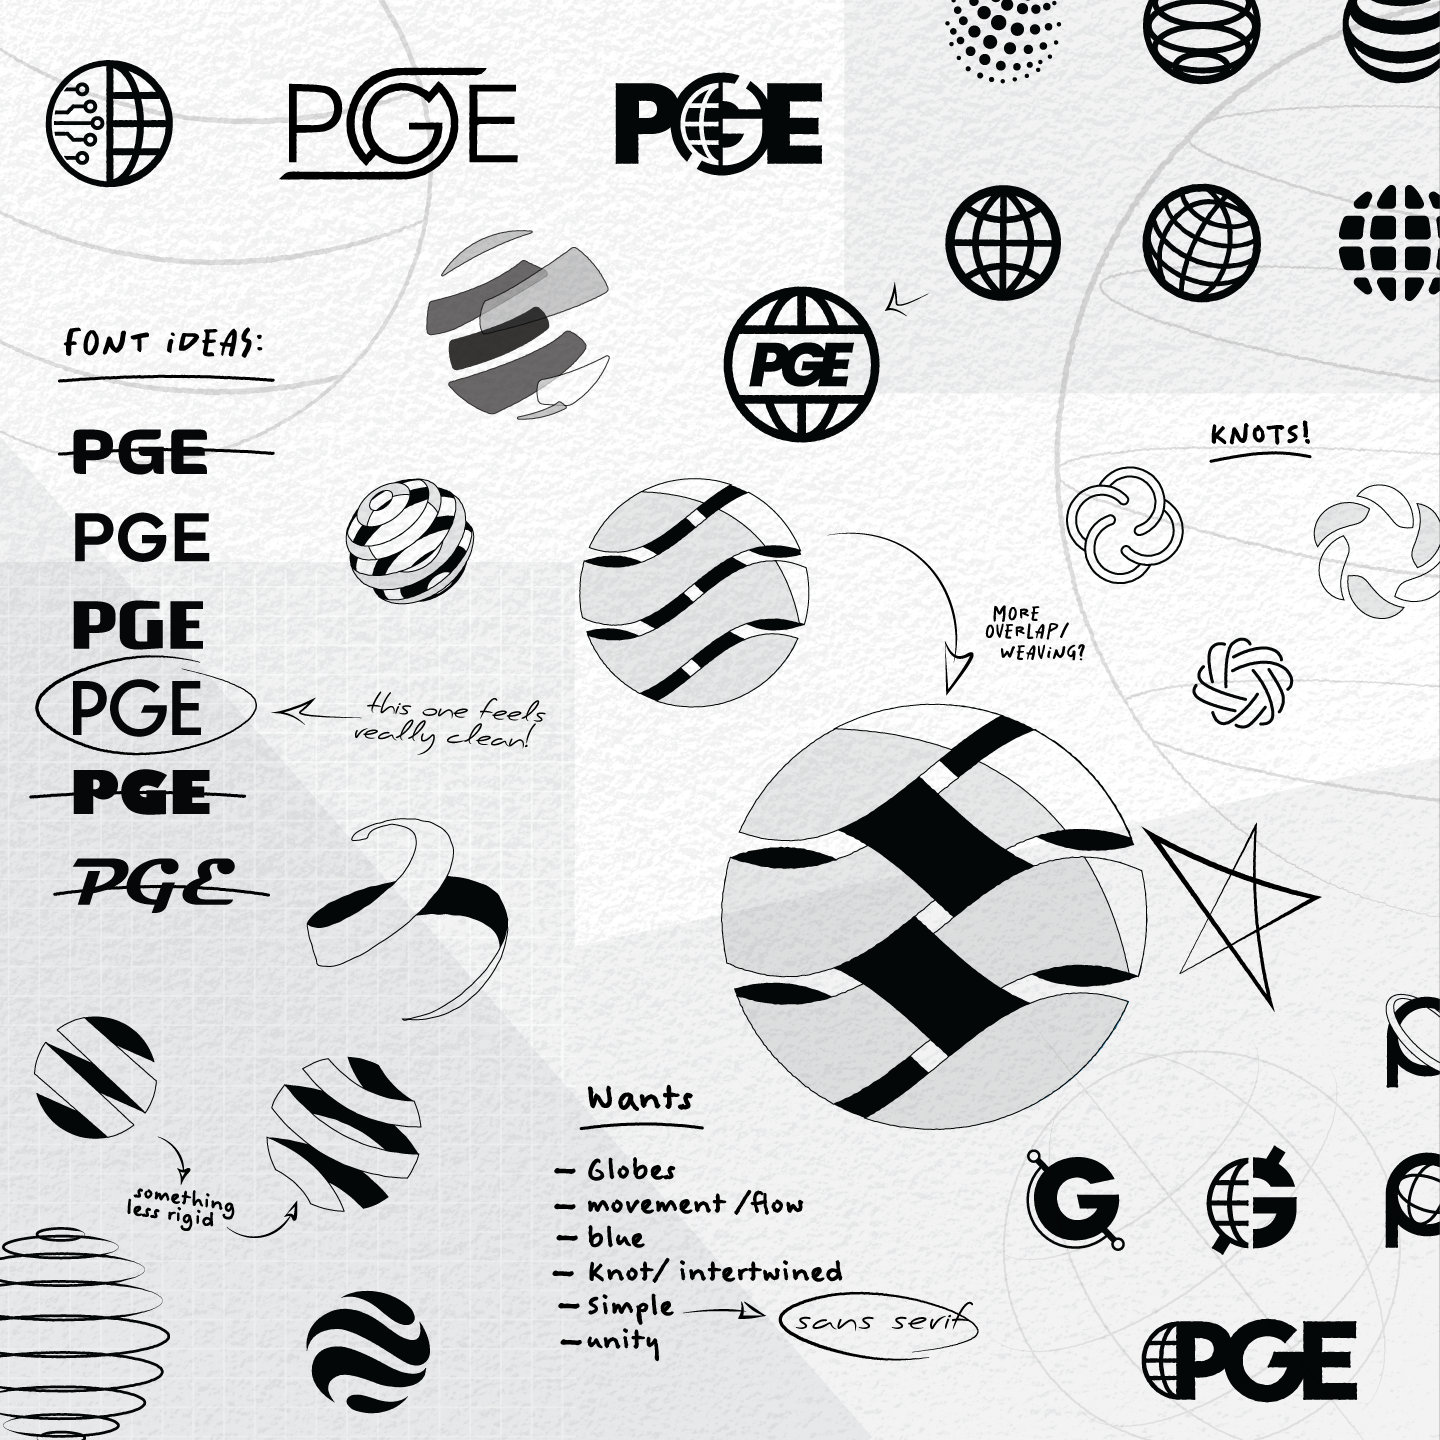 A spread of black and white sketches showing the PGE logo design process